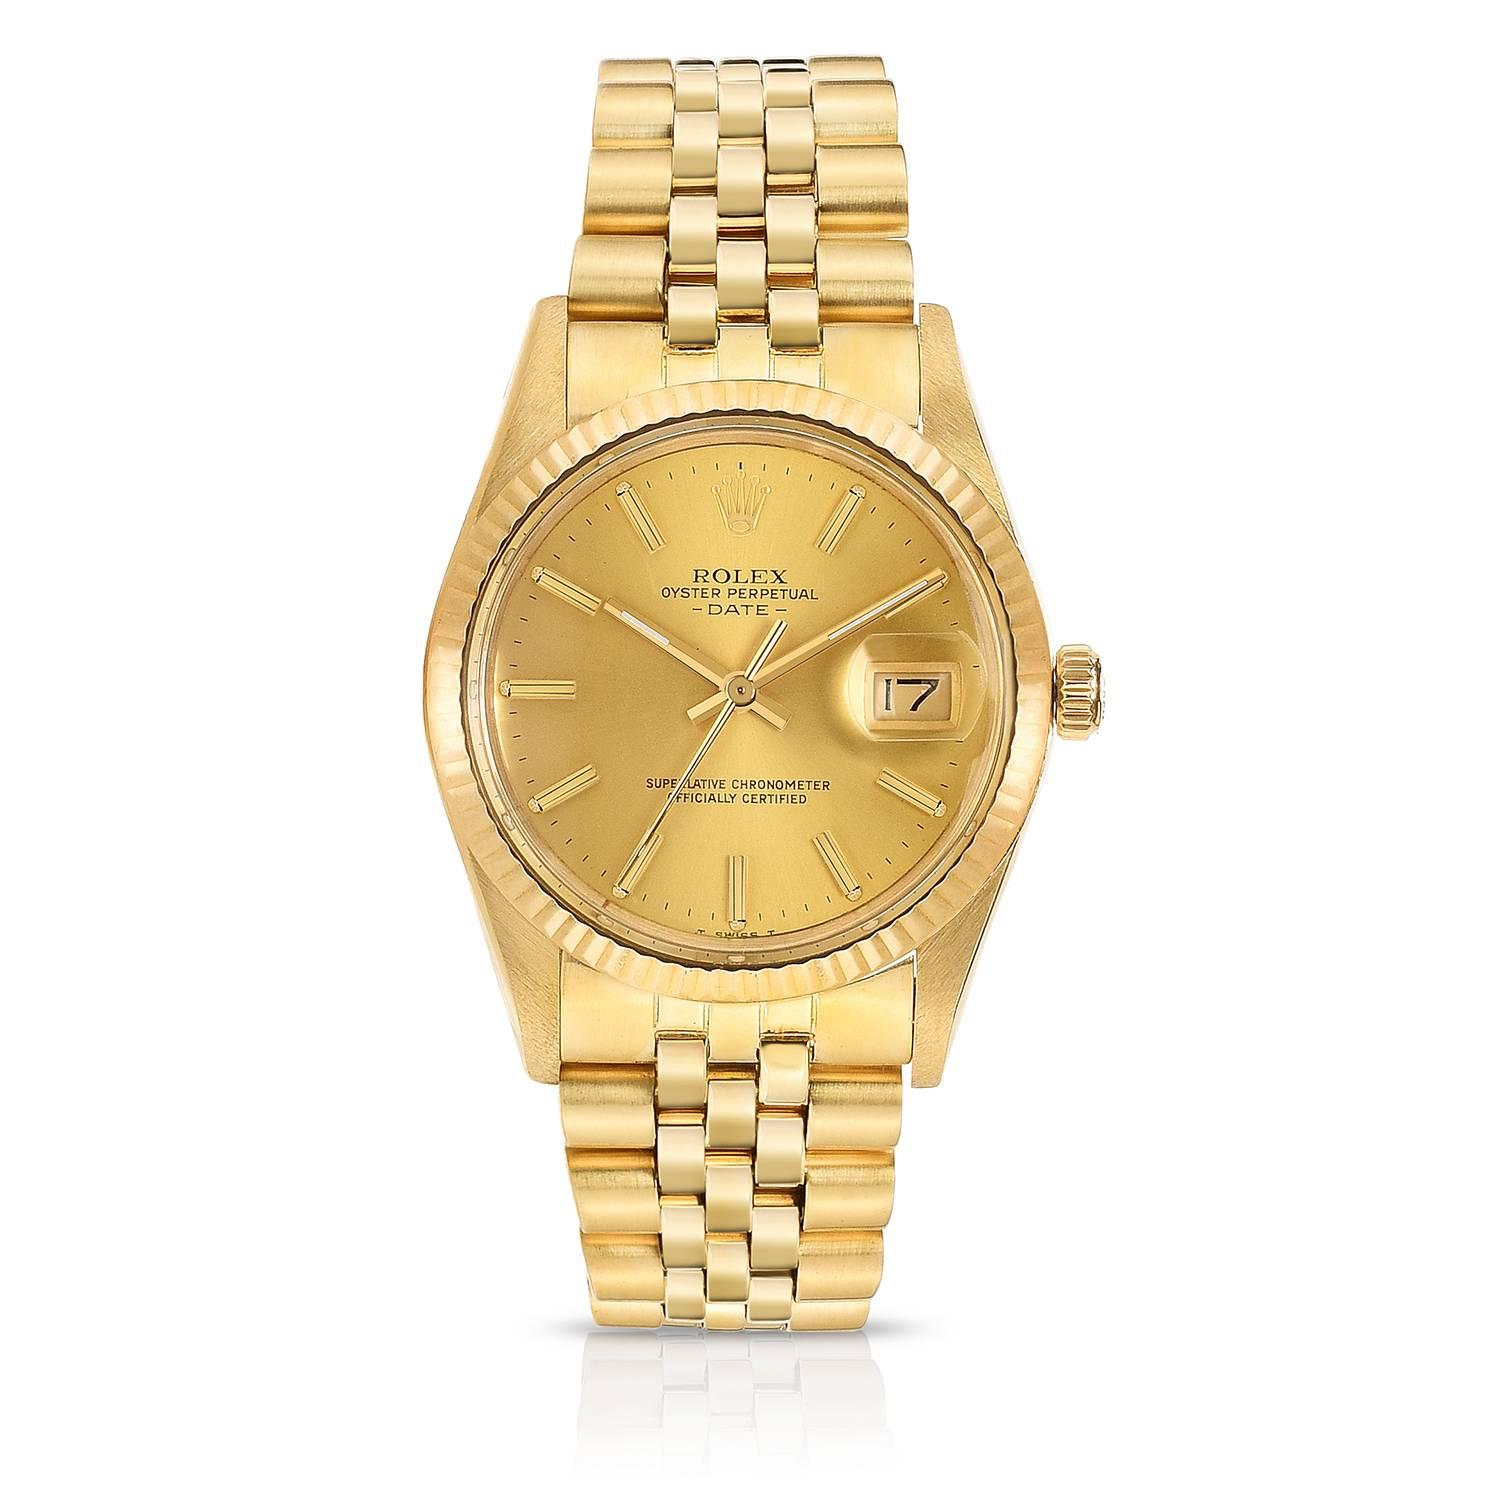 Rolex 14K Yellow Gold Oyster Perpetual Date Watch
Factory Champagne Dial with Stick Markers
14K Yellow Gold Fluted Bezel
34mm in size 
Rolex 1980s Automatic Movement
Acrylic Crystal
Quick-Set Date Function
Early 1980's Production
Comes Fitted on